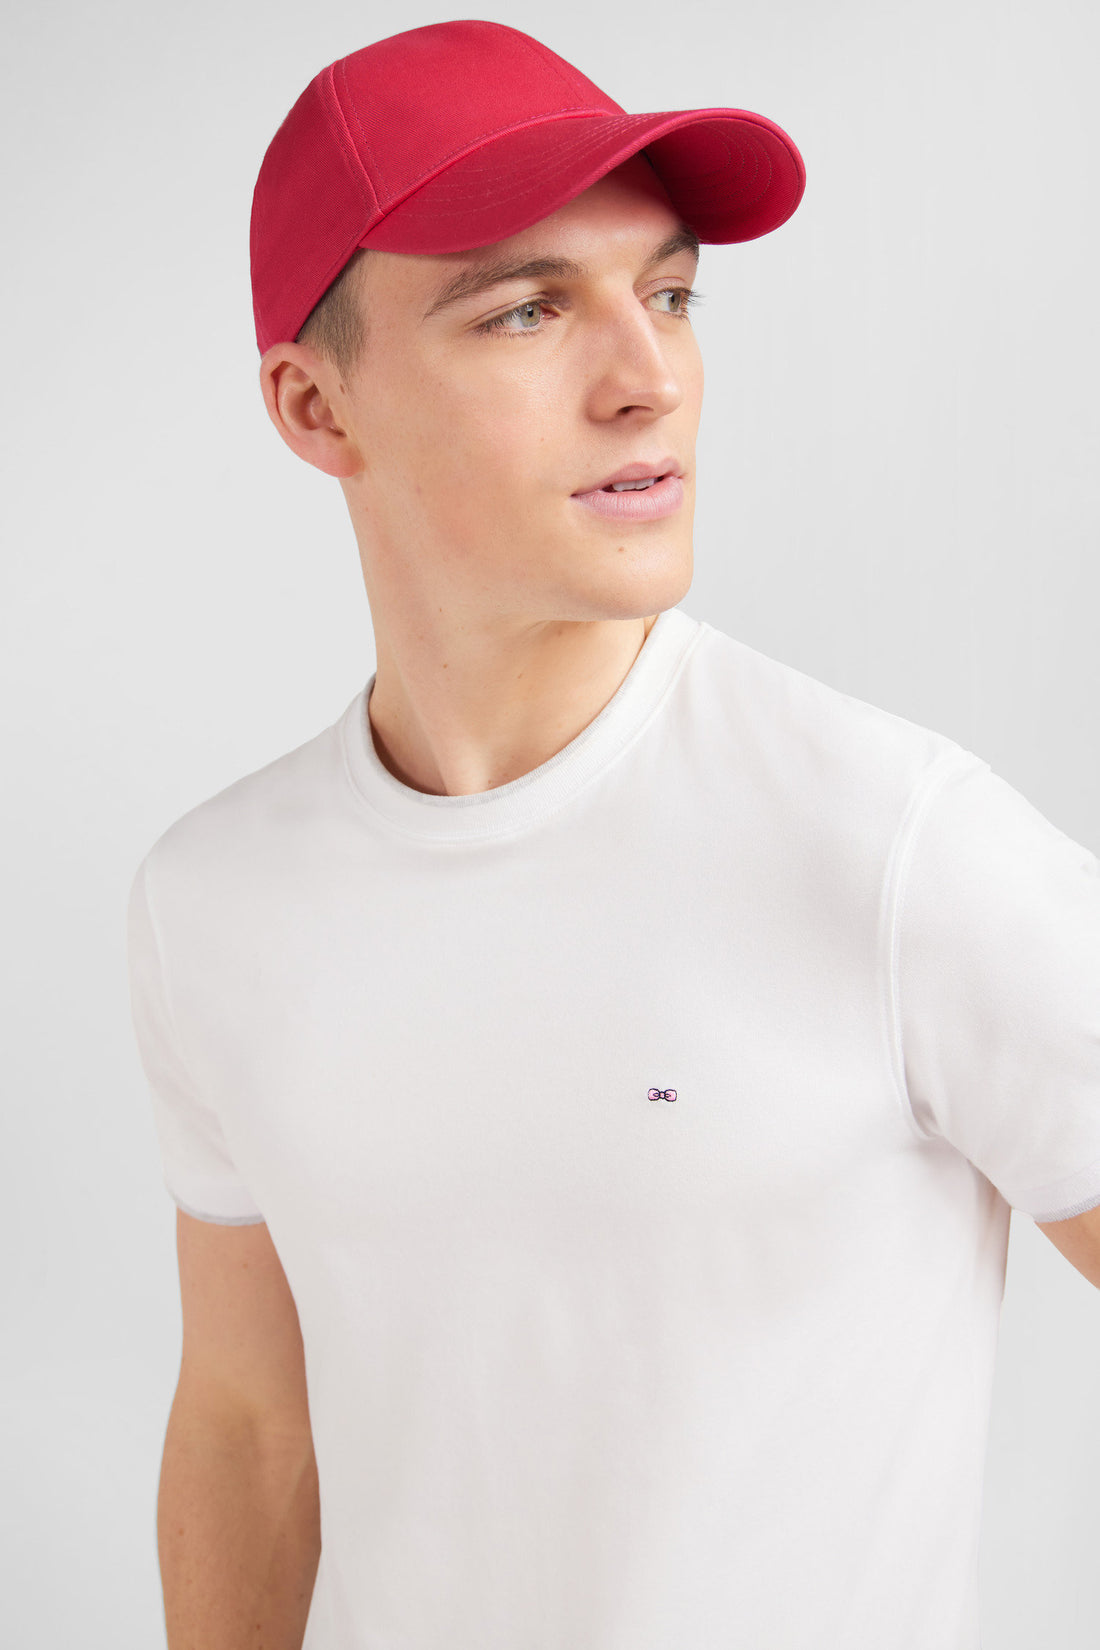 Red Cotton Canvas Cap With Bow Tie Embroidery_E24CHACA0001_RGM10_01